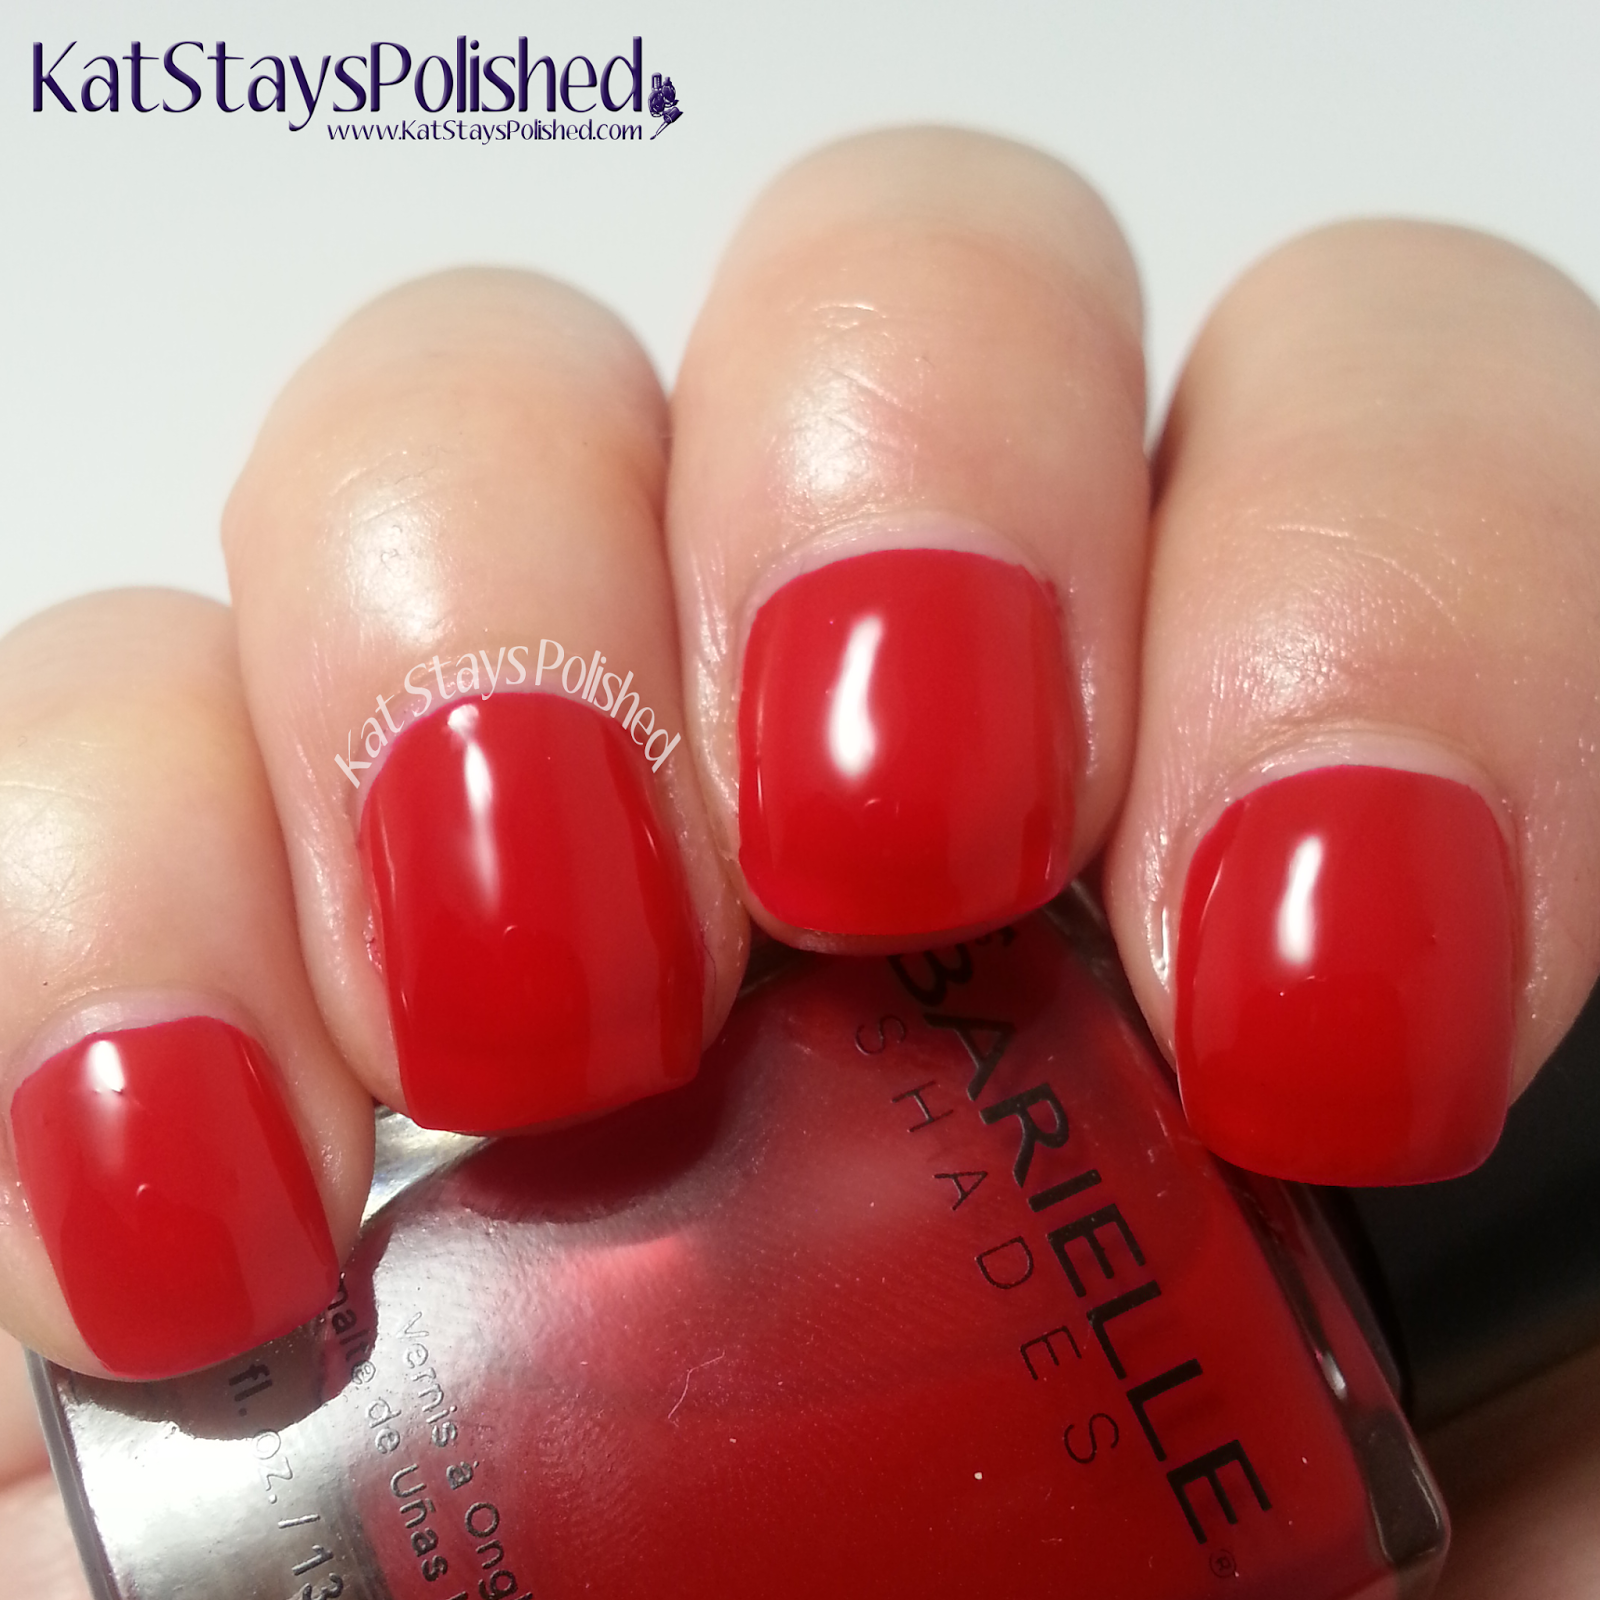 Barielle Keys Collection - Summer 2014 - Miami Heat | Kat Stays Polished